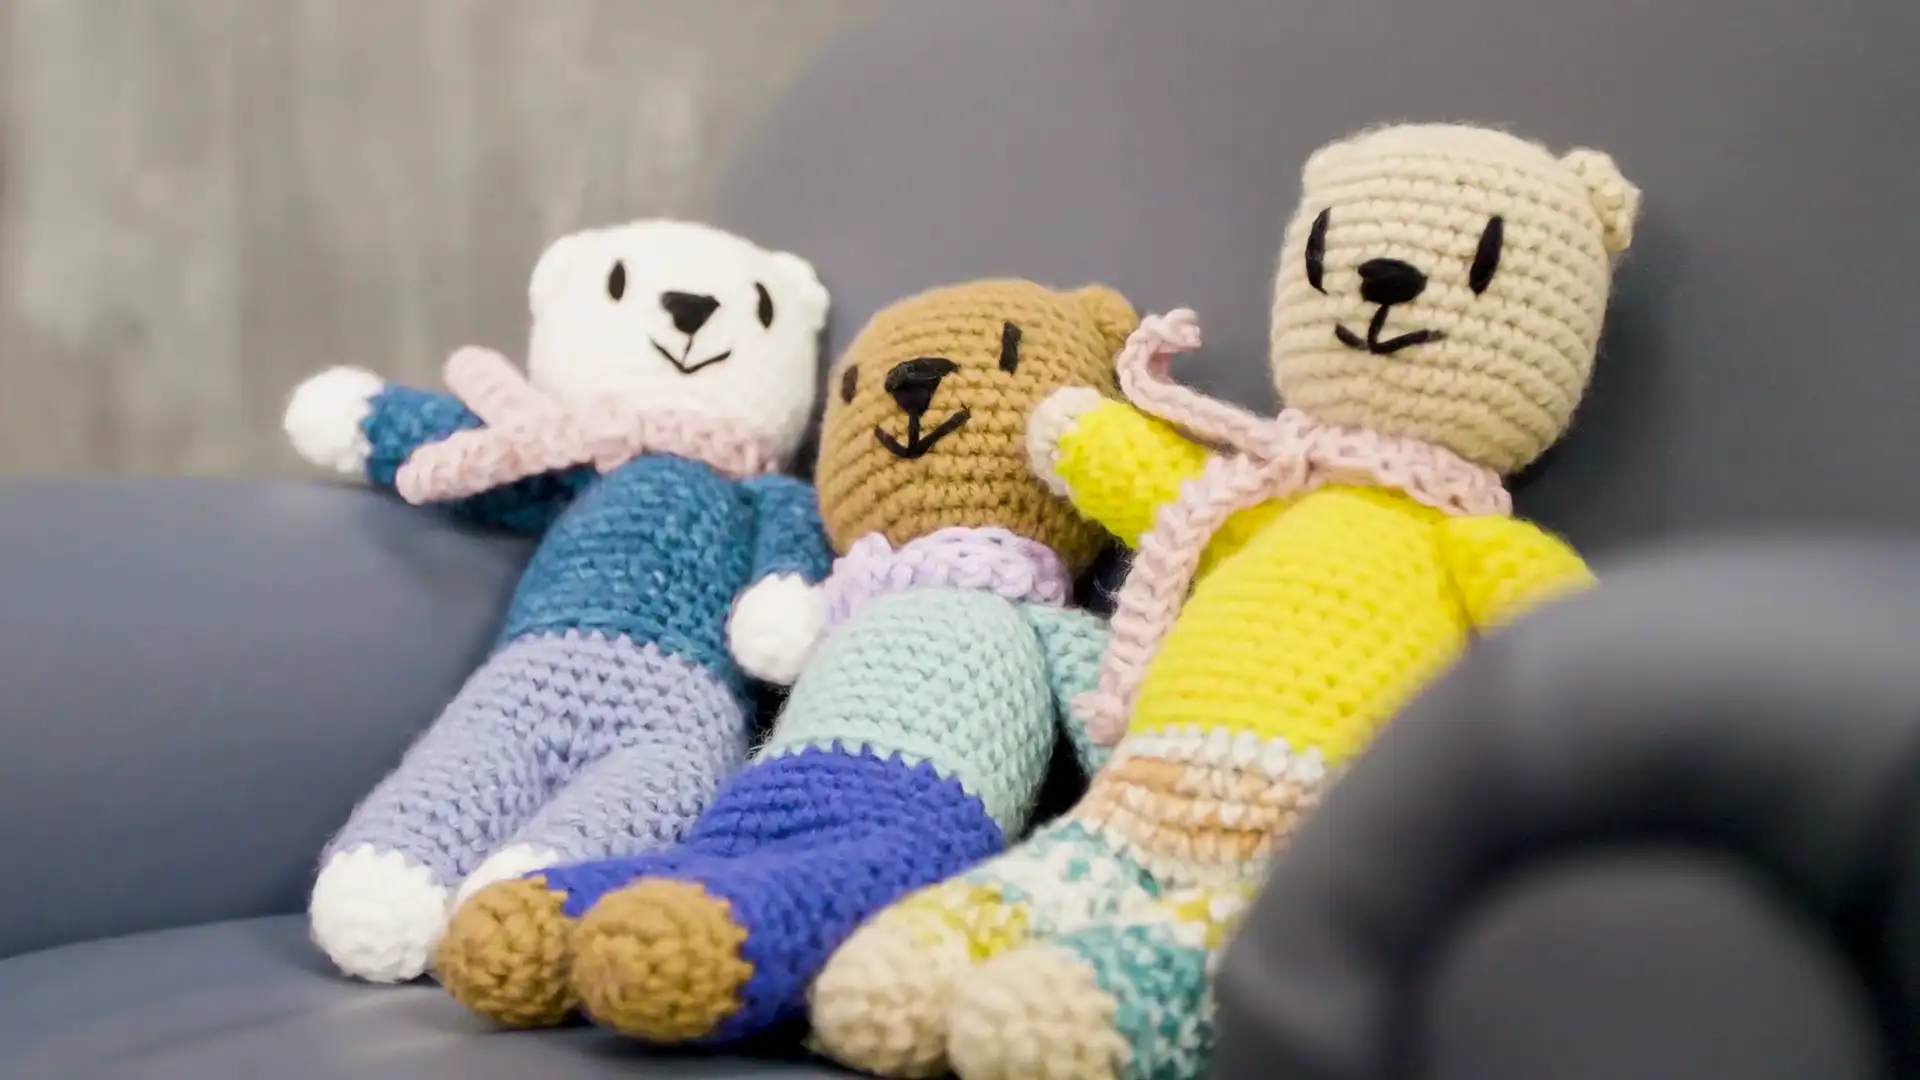 A trio of JereBear crocheted teddy bear sit on a couch